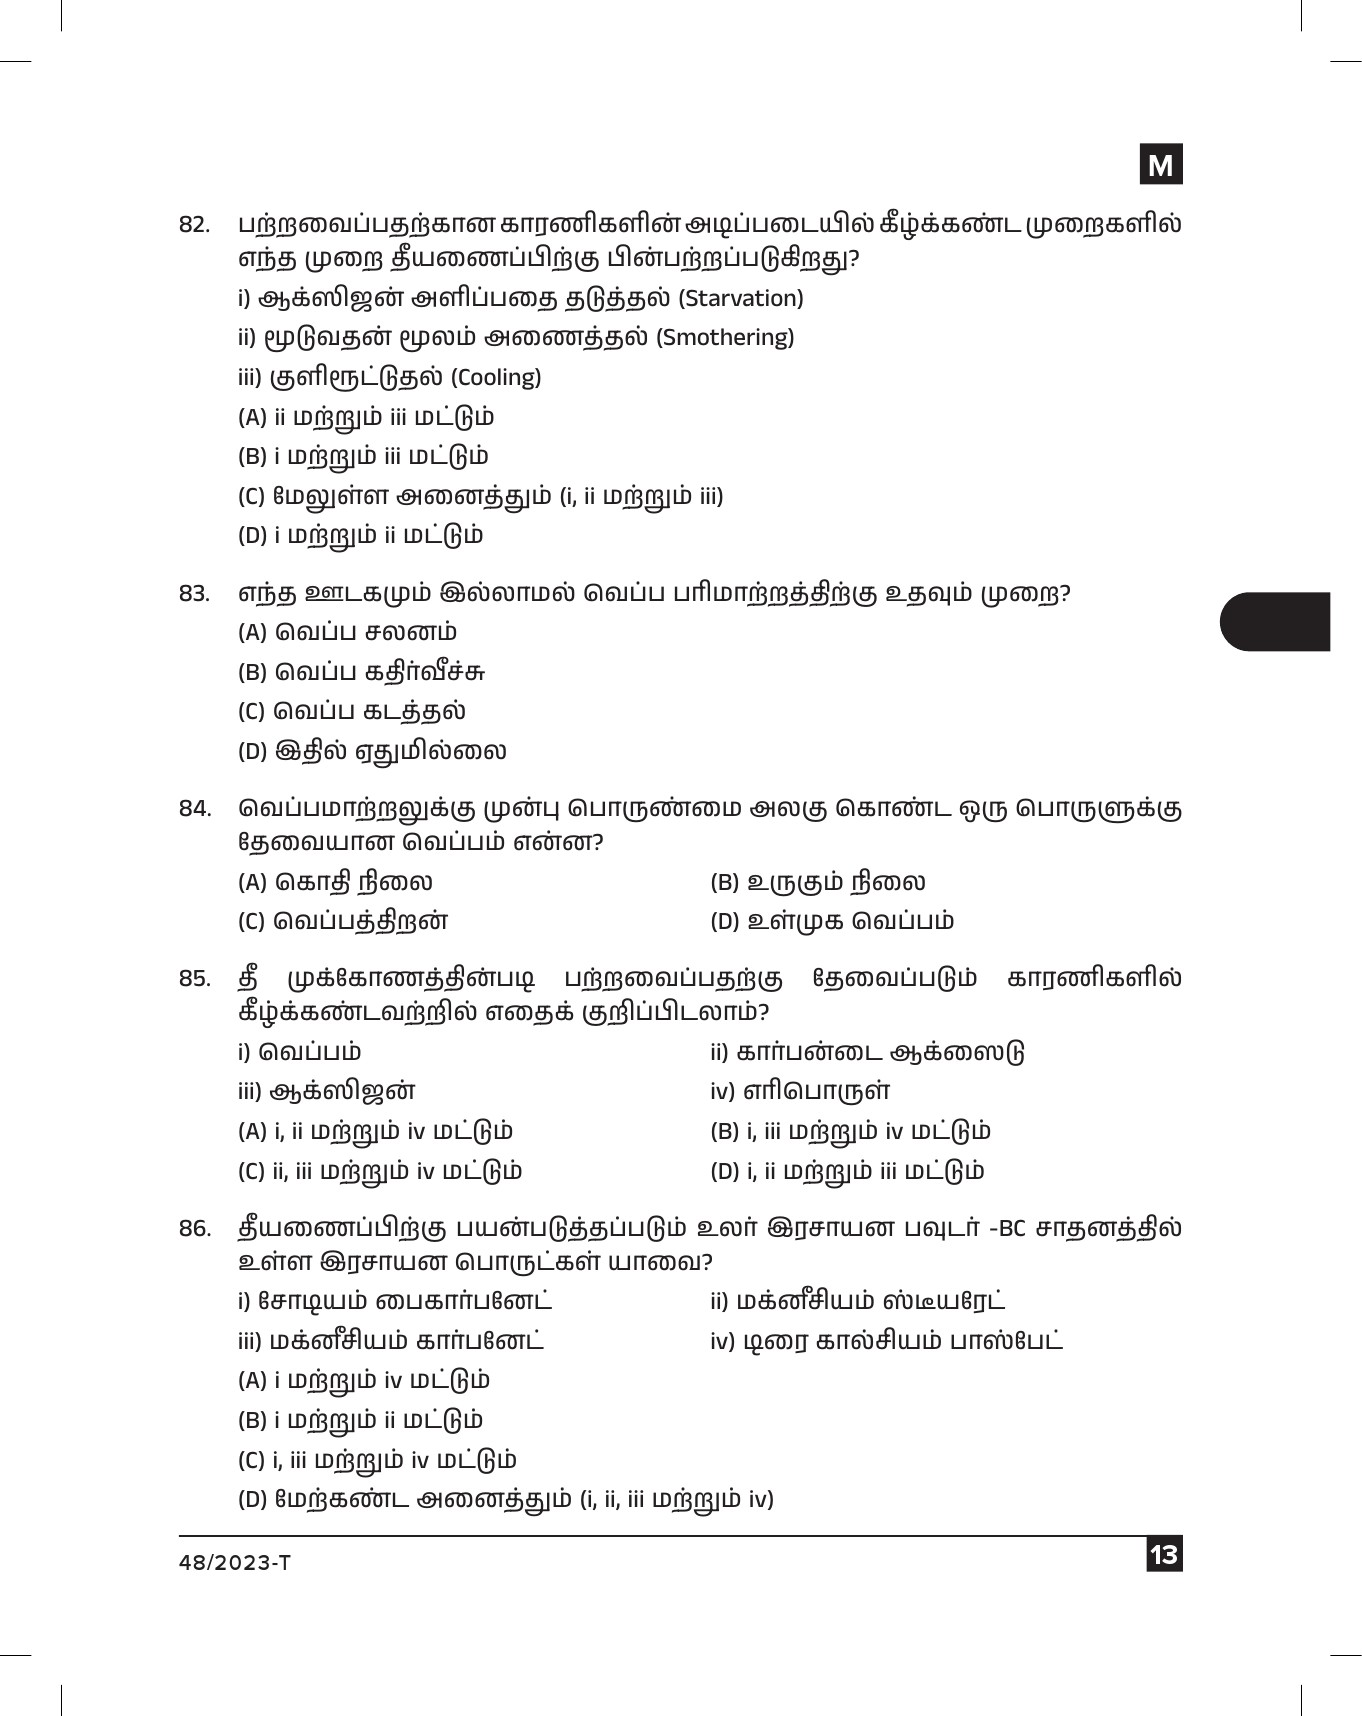 KPSC Fire and Rescue Officer Tamil Exam 2023 Code 0482023 T 12